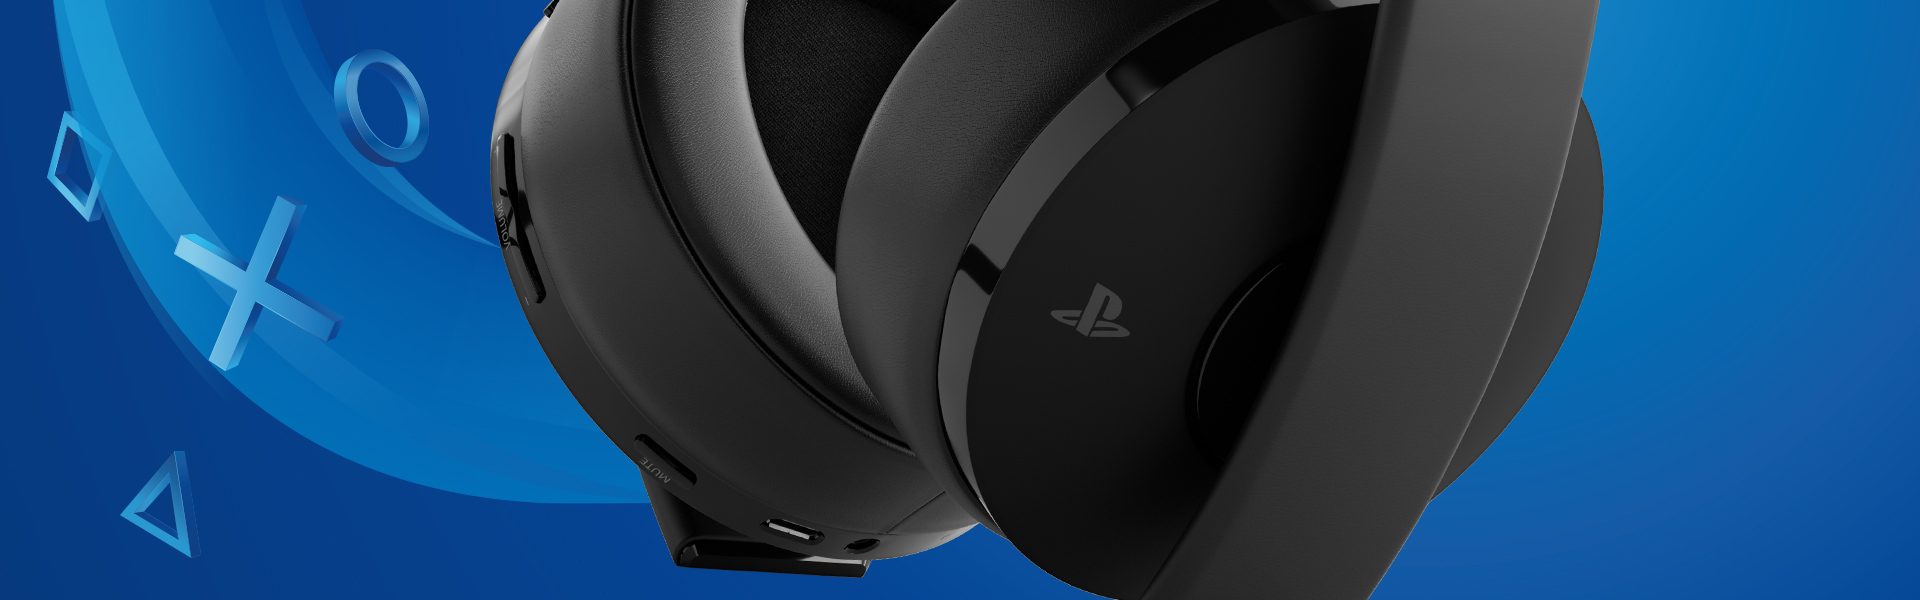 playstation headphones replacement usb